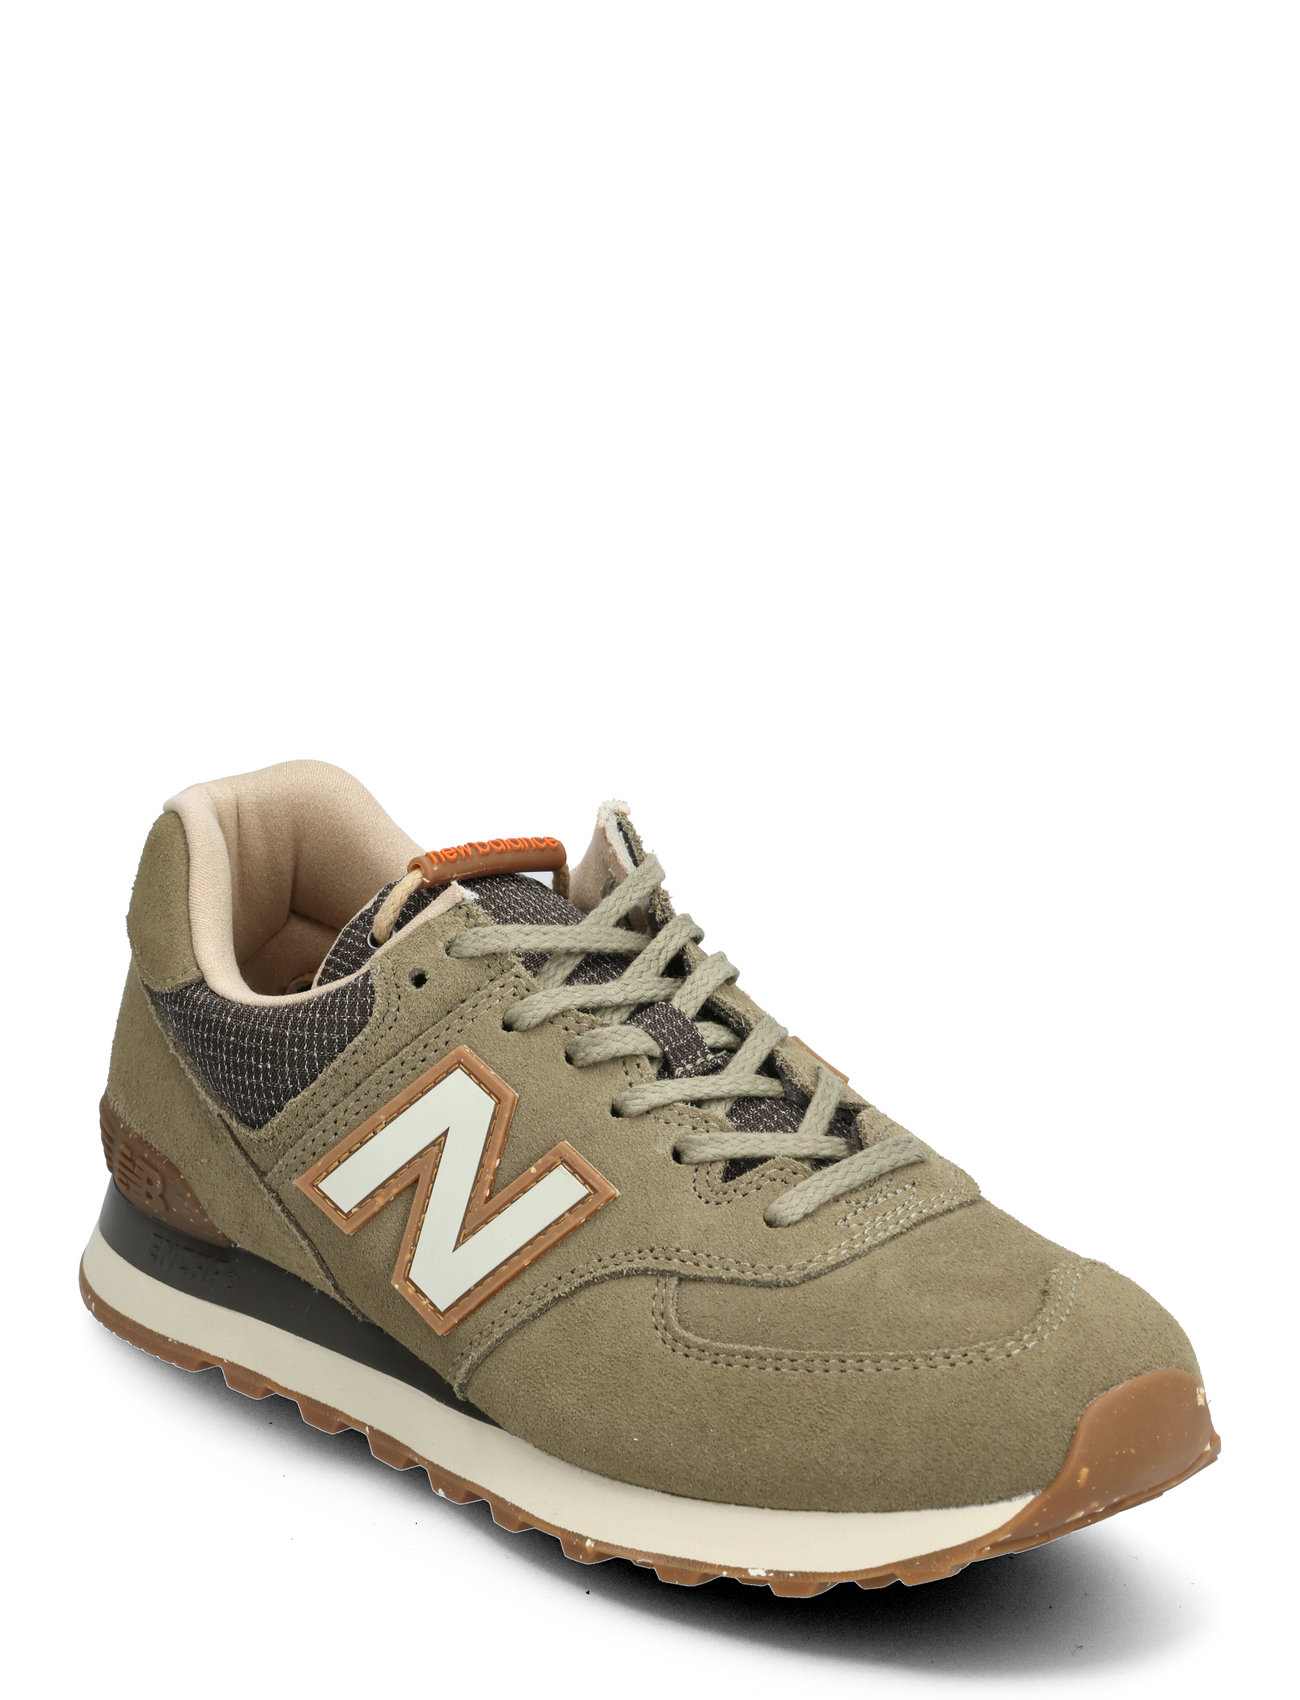 New Balance 574 Sport Sneakers Low-top Sneakers Green New Balance